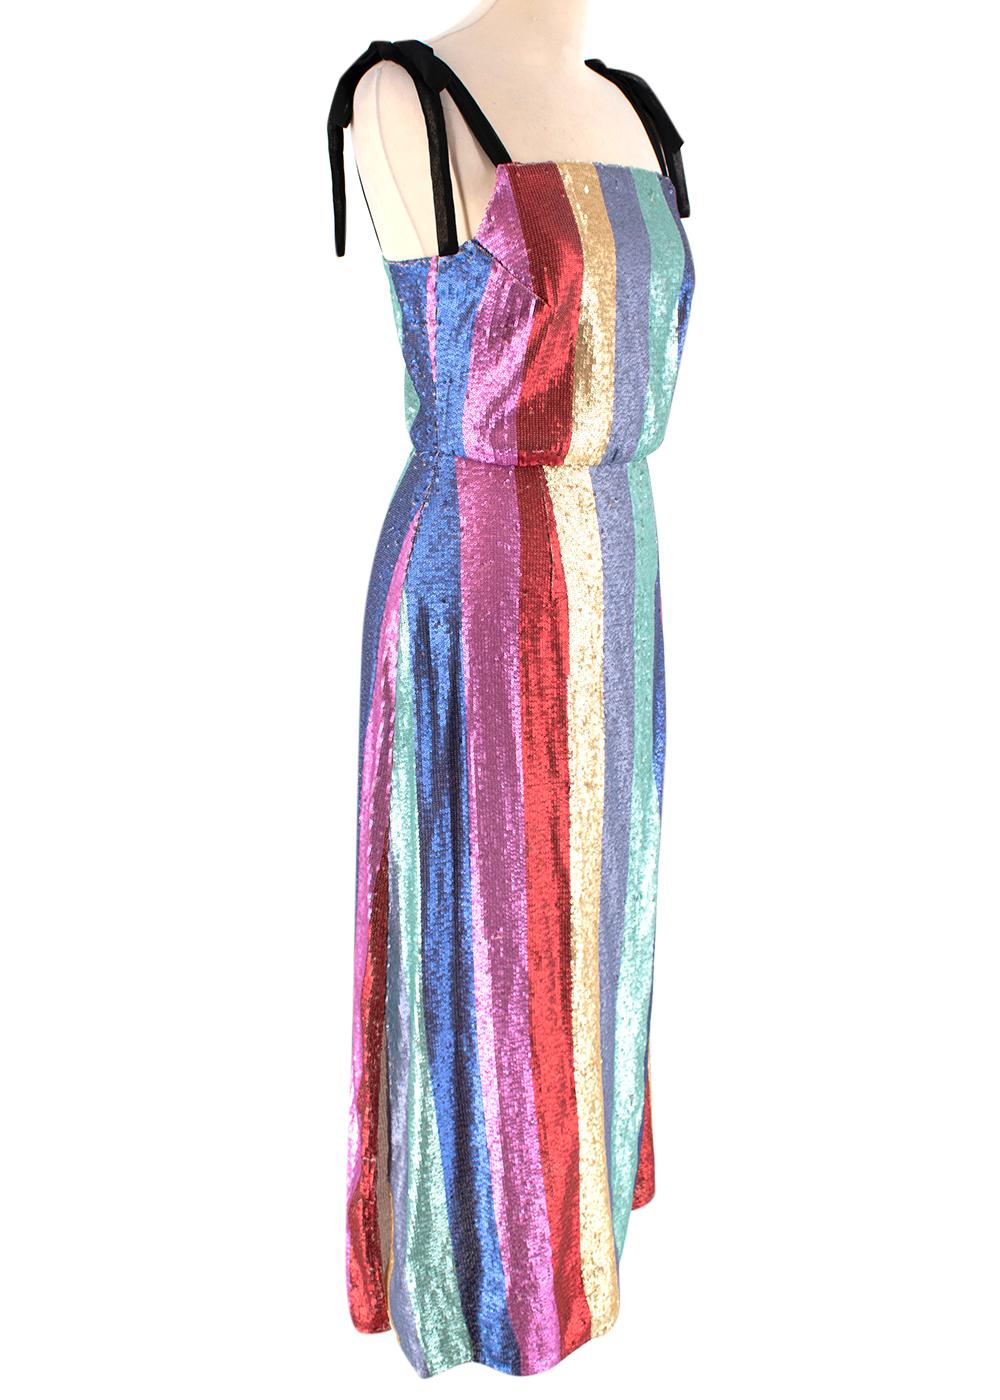 Rixo Striped Sequin Midi Dress with Black Straps 

-Beautiful faded rainbow sequin stripes 
-luxurious soft crepe black straps with bow detail 
-Side slits 
-Concealed zip fastening to the side
-Joyful design 
-Partially lined

Materials:

100%